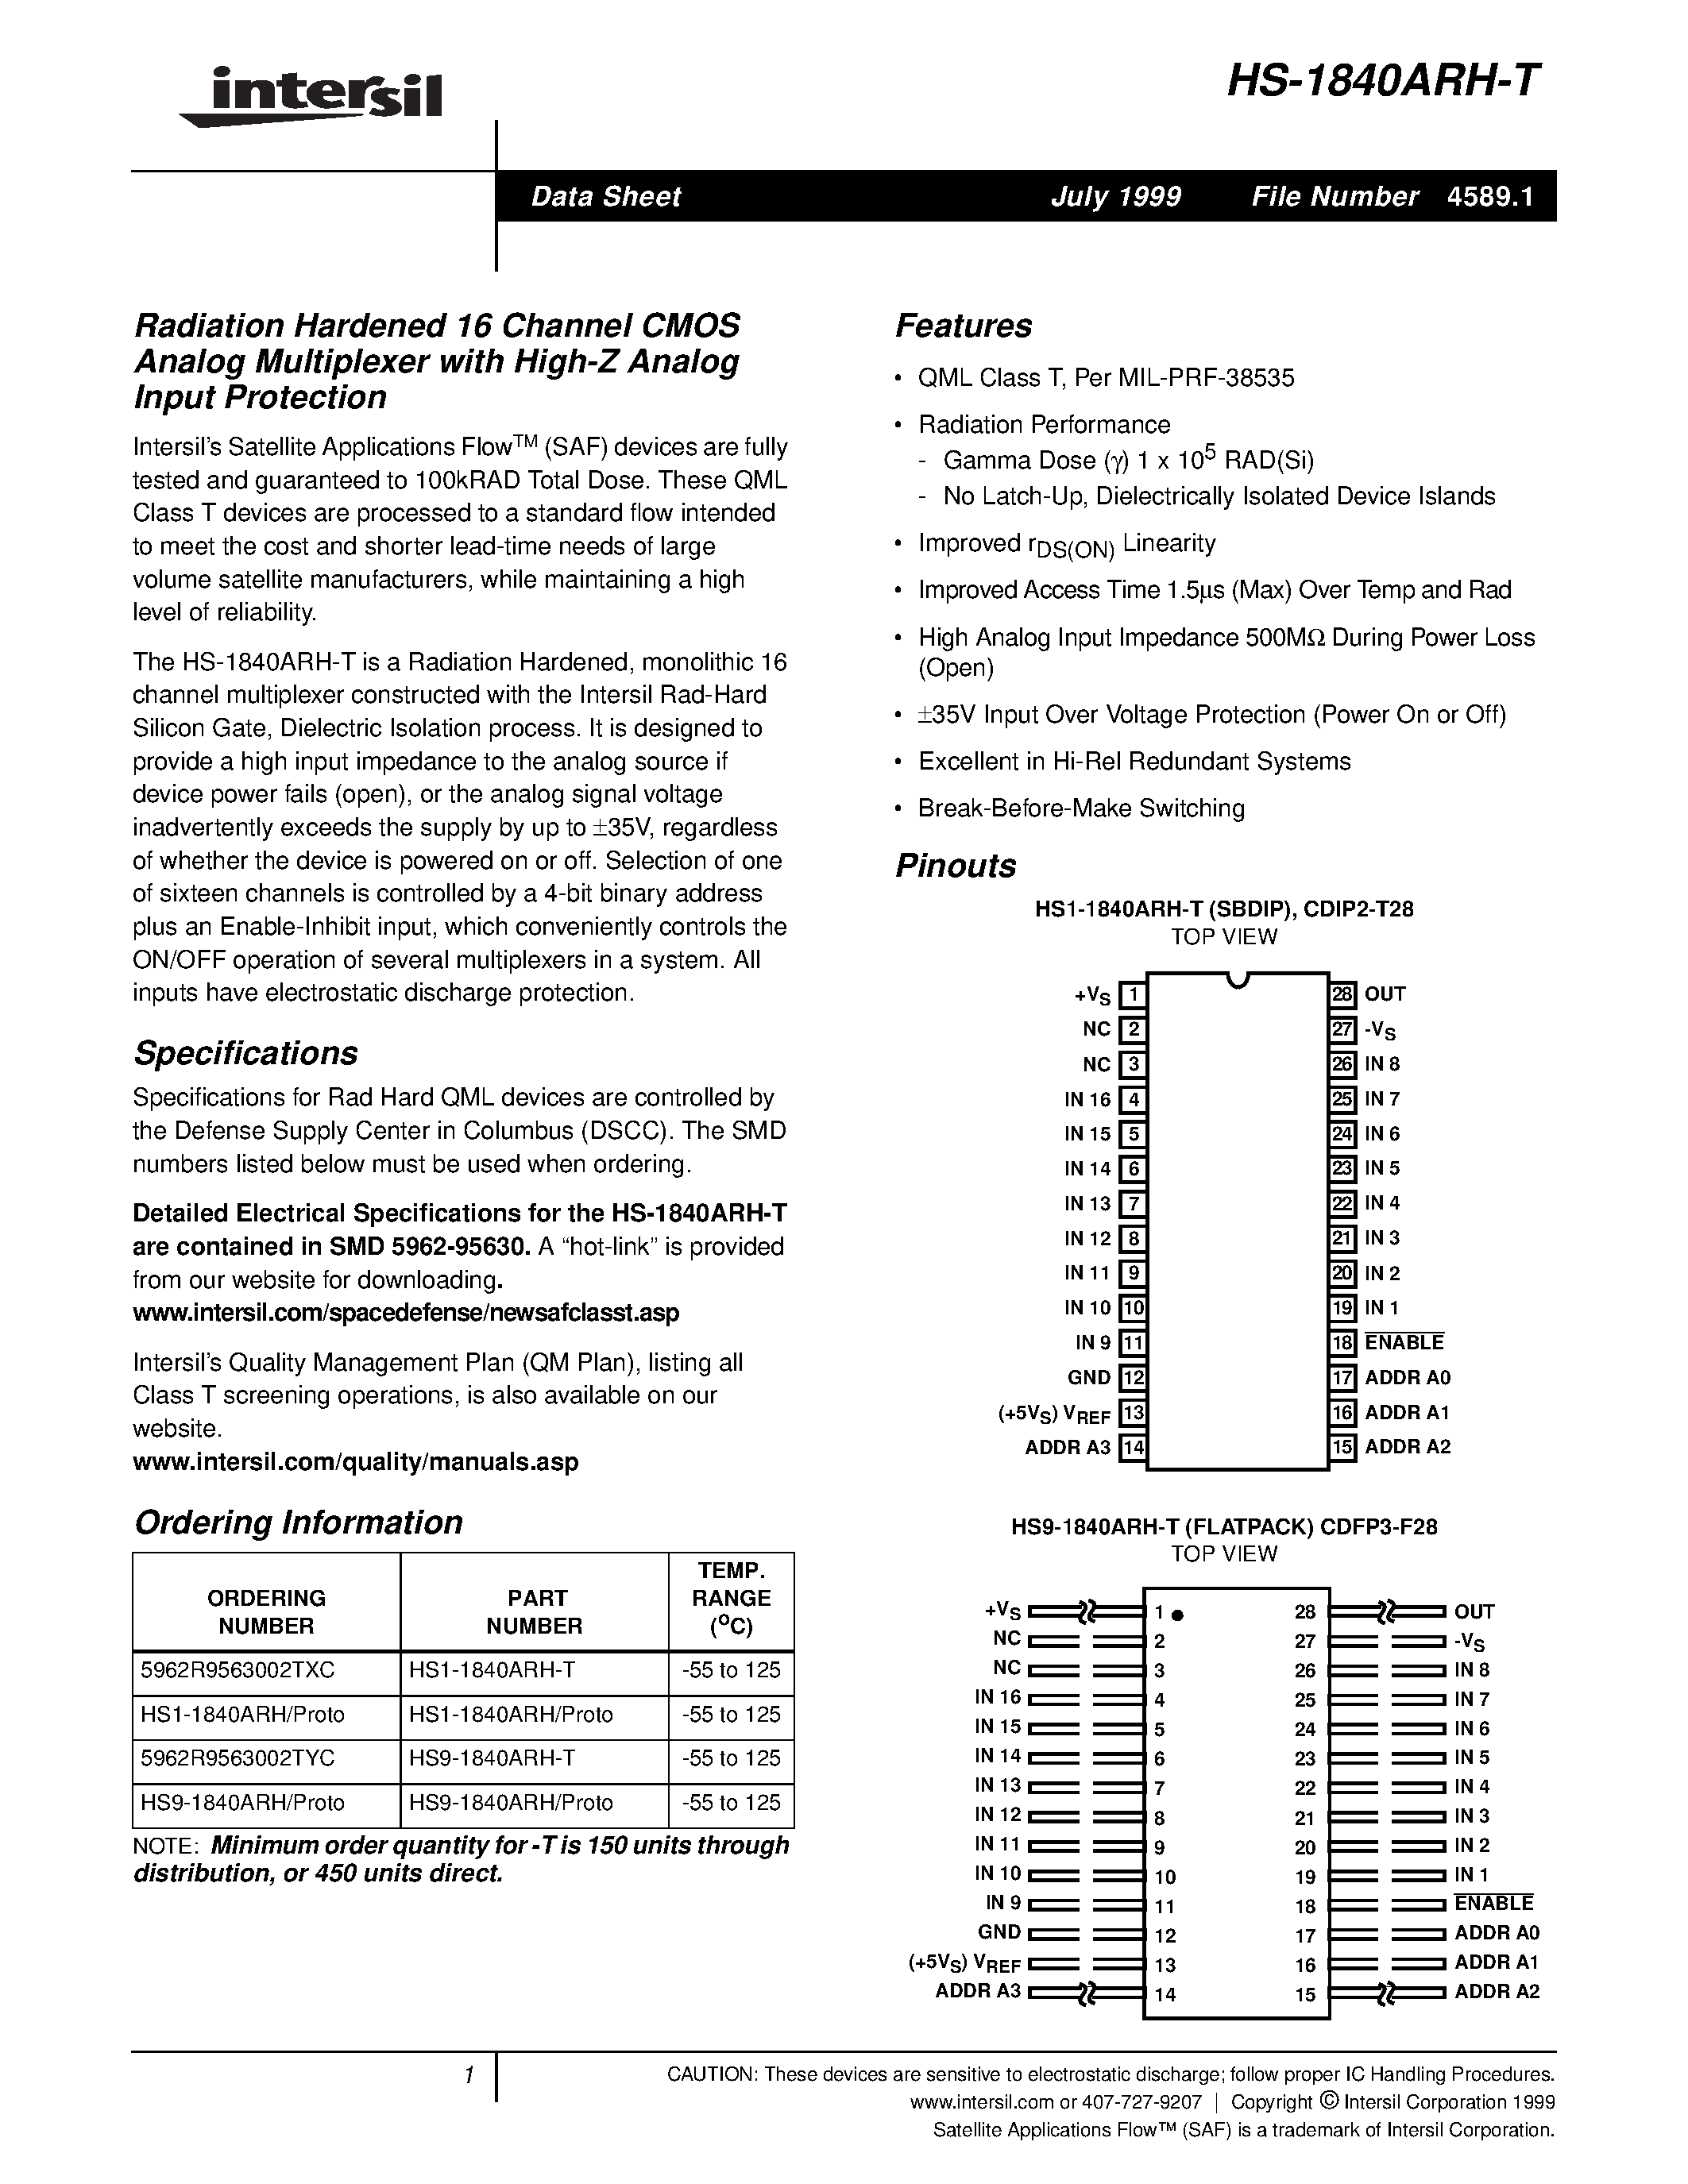 Datasheet HS-1840ARH-T - Radiation Hardened 16 Channel CMOS Analog Multiplexer with High-Z Analog Input Protection page 1